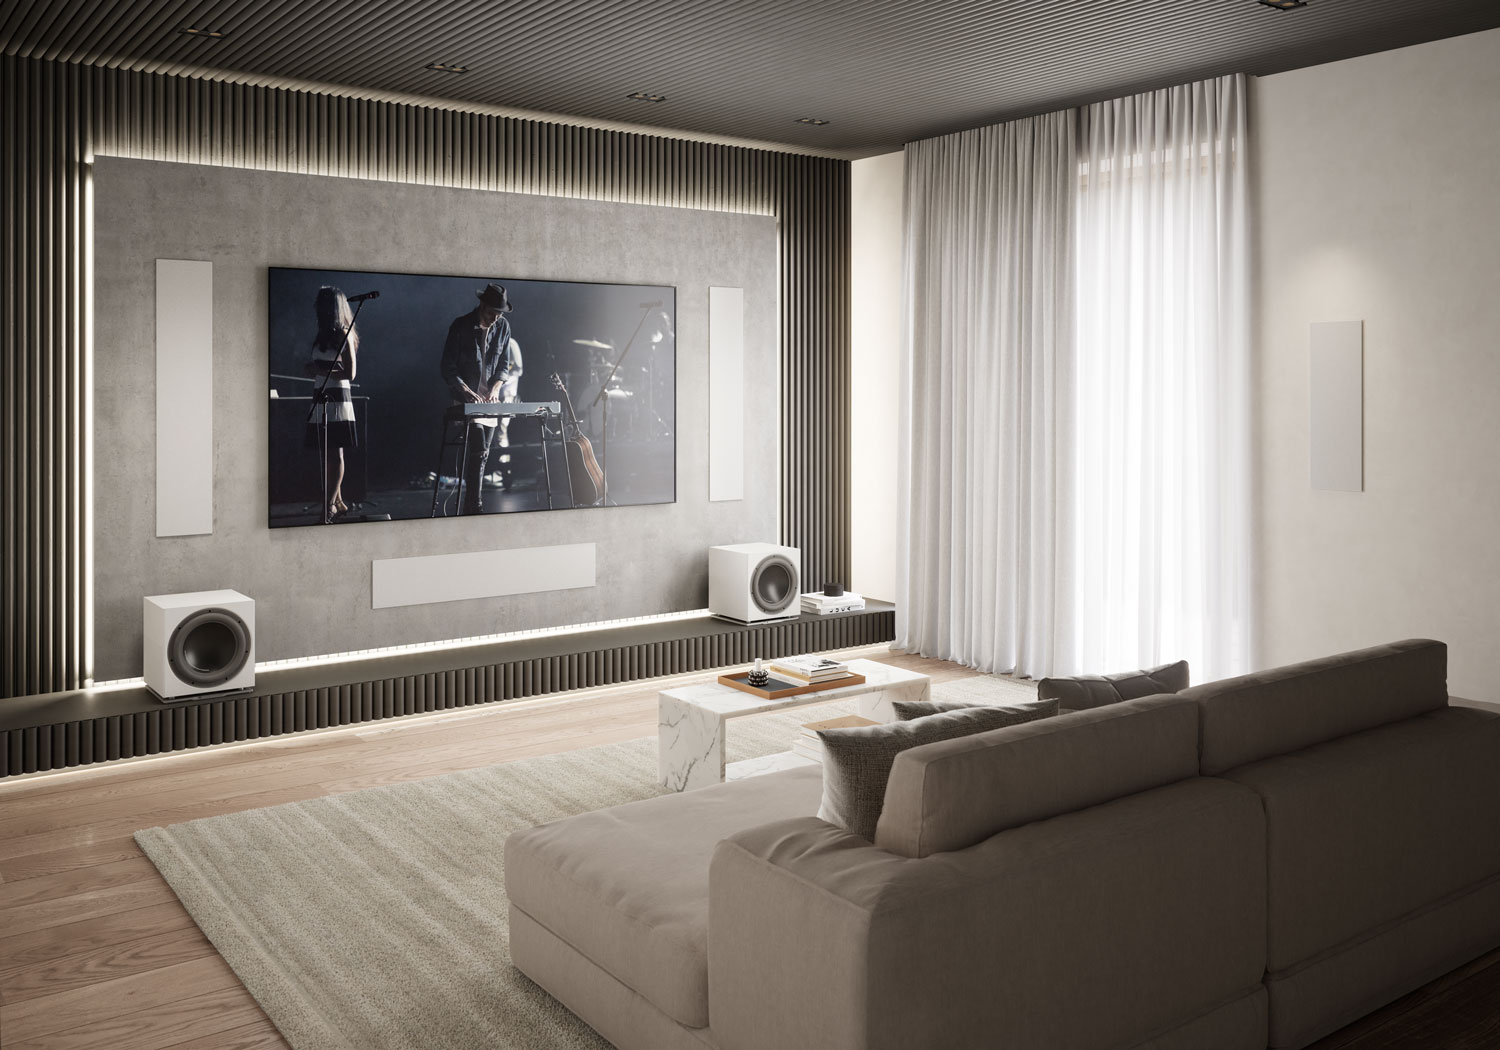 DALI PHANTOM M-675 installed in Home Cinema with white grilles